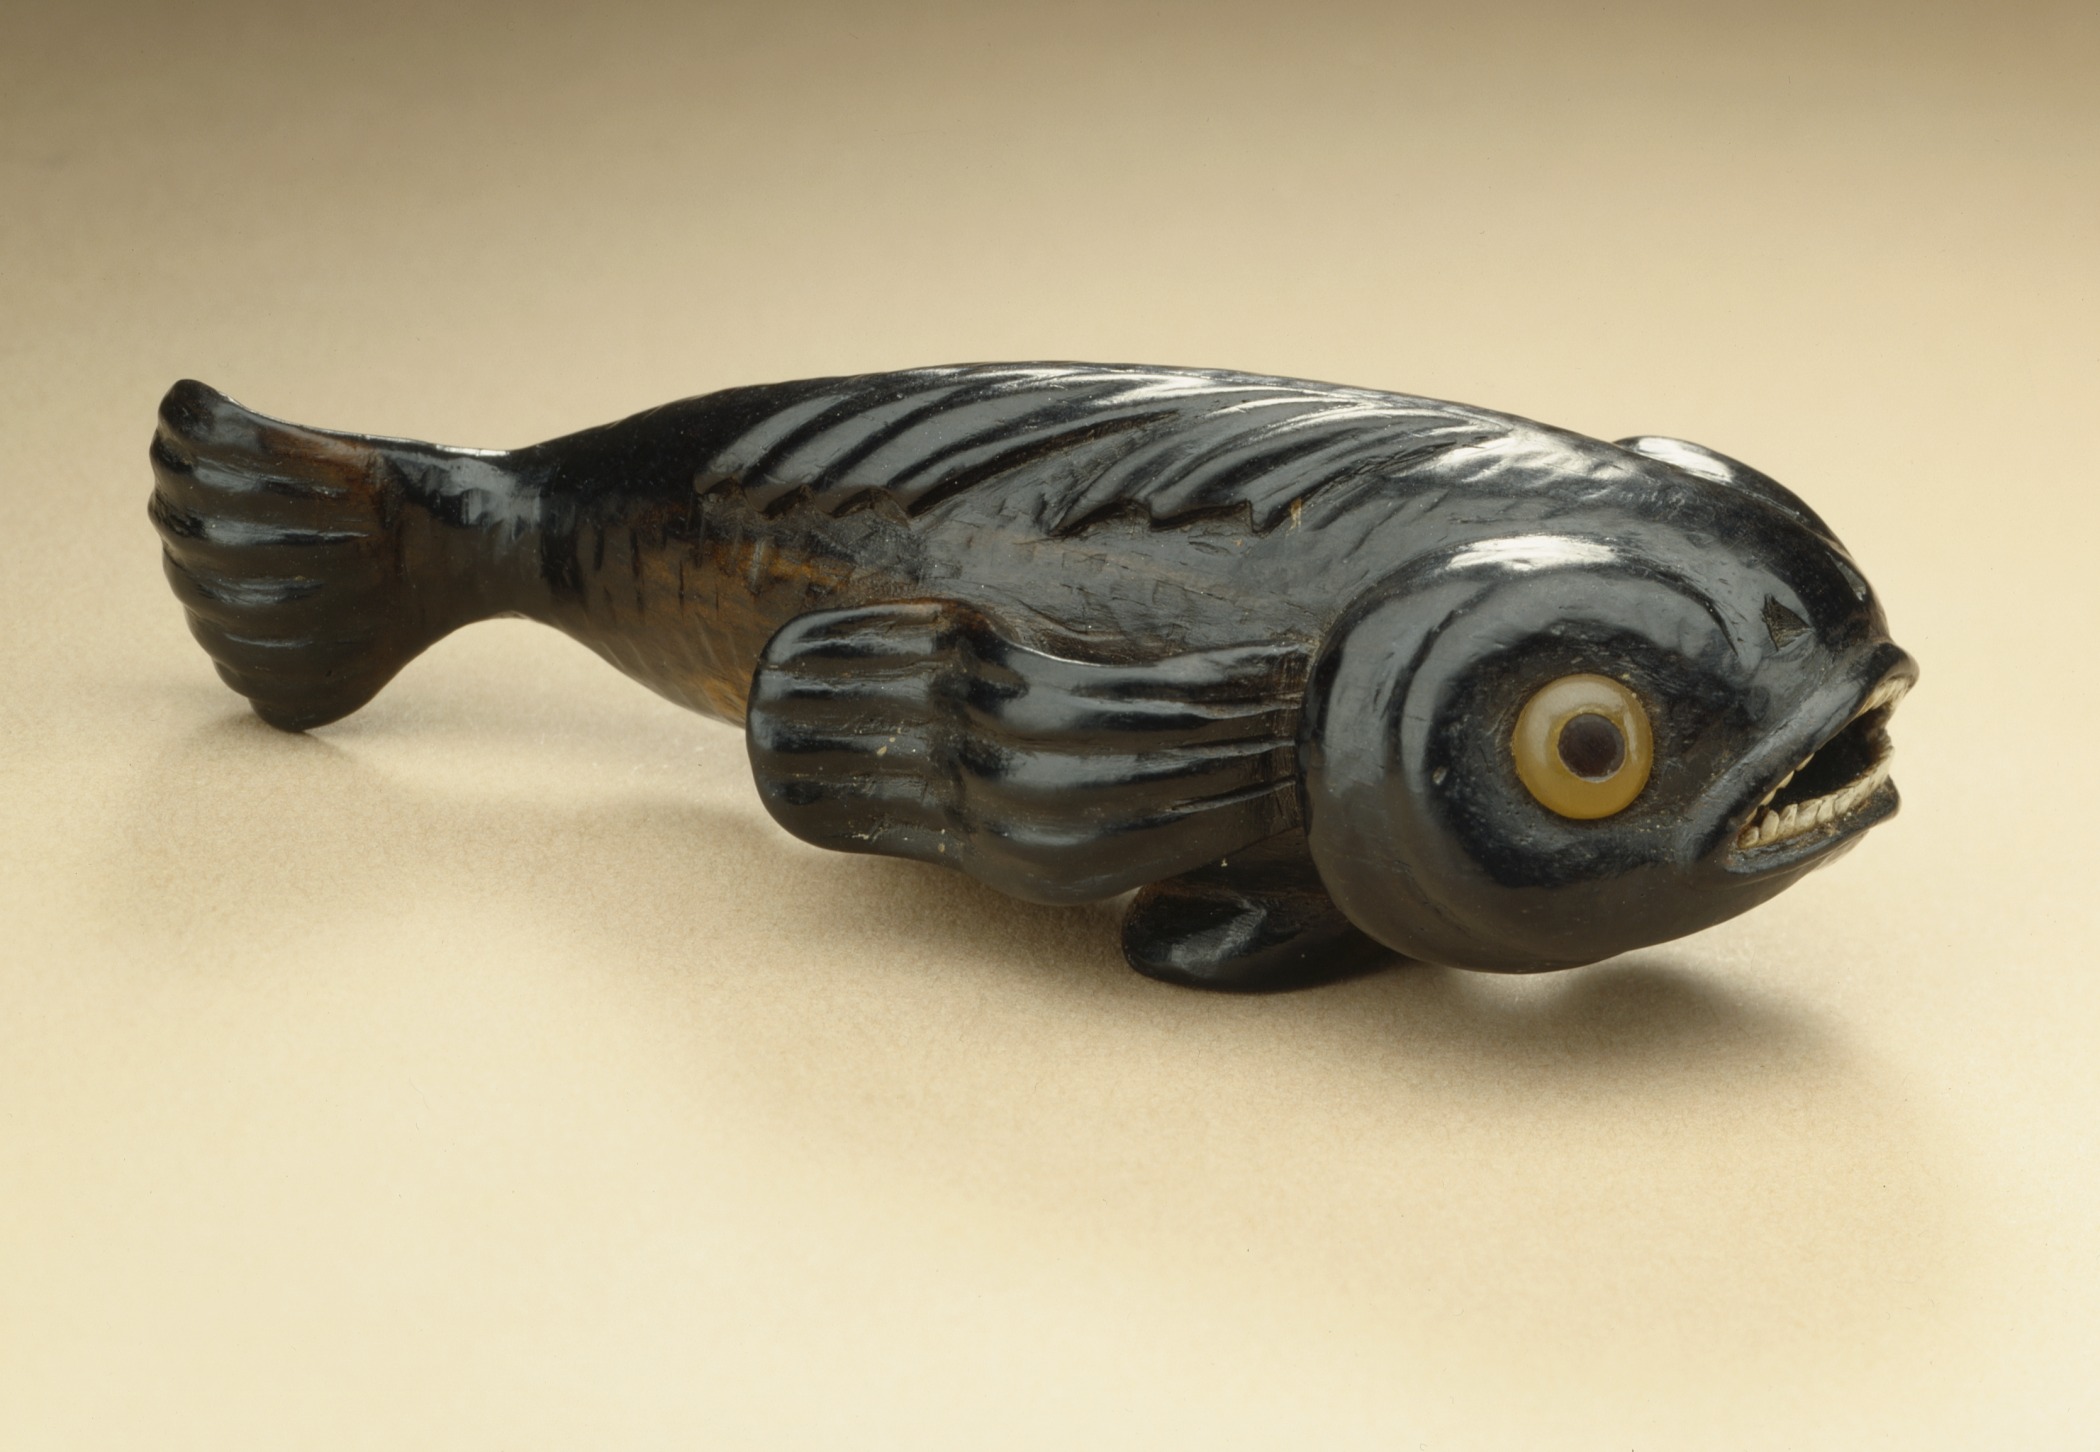 A carving of a carnivorous pilot fish made from black persimmon wood with colored inlays for its eyes (yellow) and teeth (white).